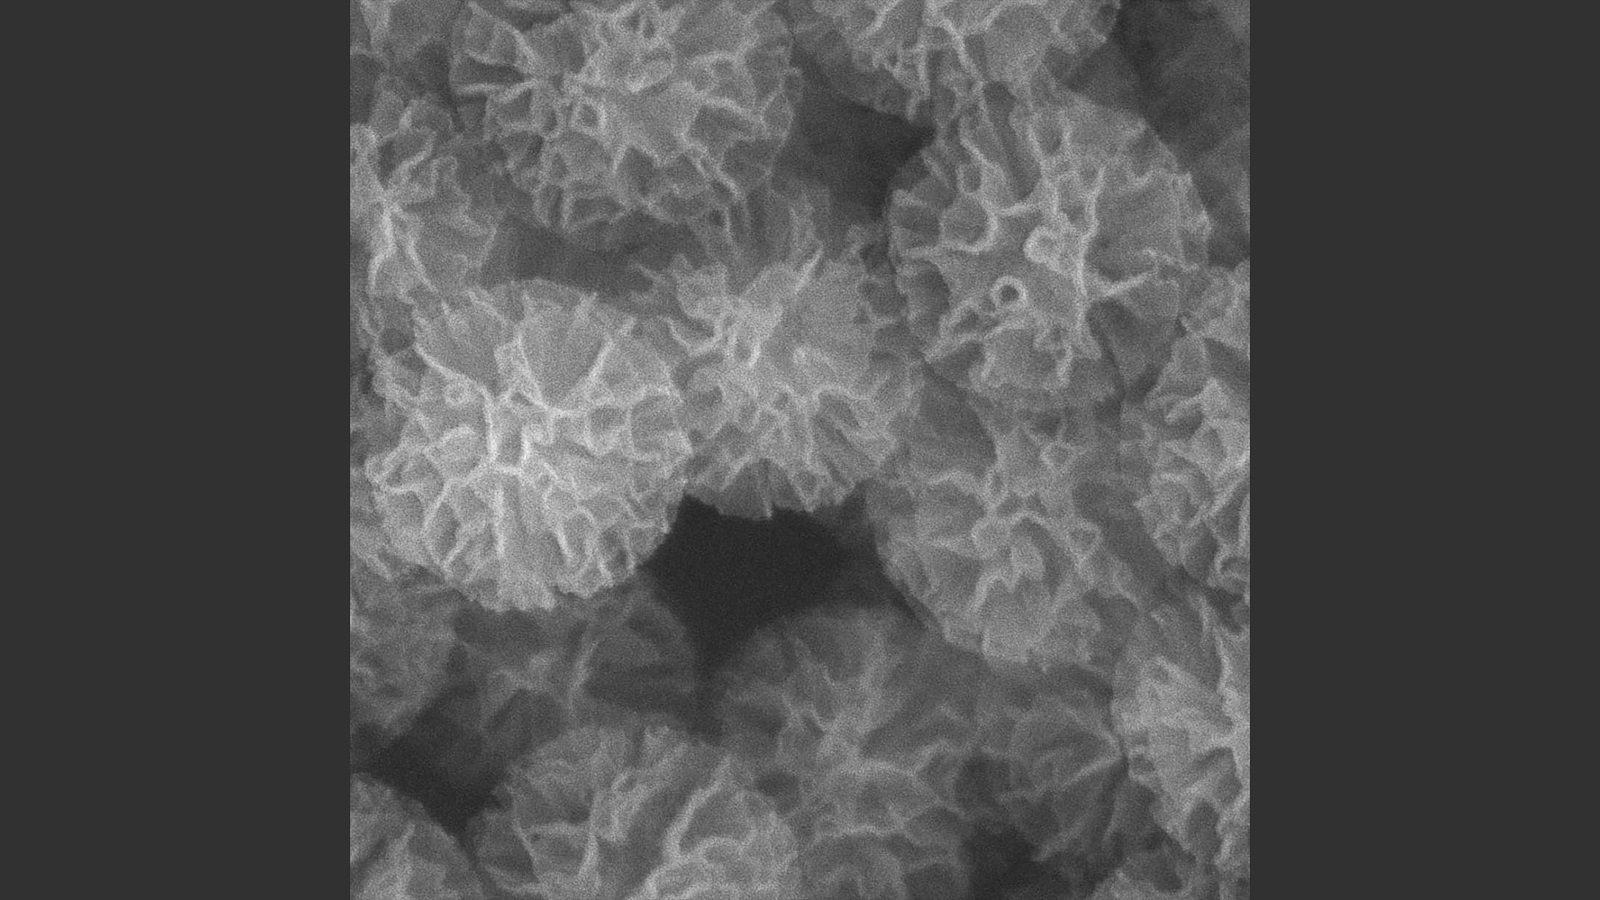 Scanning Electron Microscopy (SEM) images of the porous silica nanodevices. The exposed amount of surface area provides greater opportunity to attach to the peptide-attracting antibody fragments. (Image by Center for Nanoscale Materials, Argonne National Laboratory.)